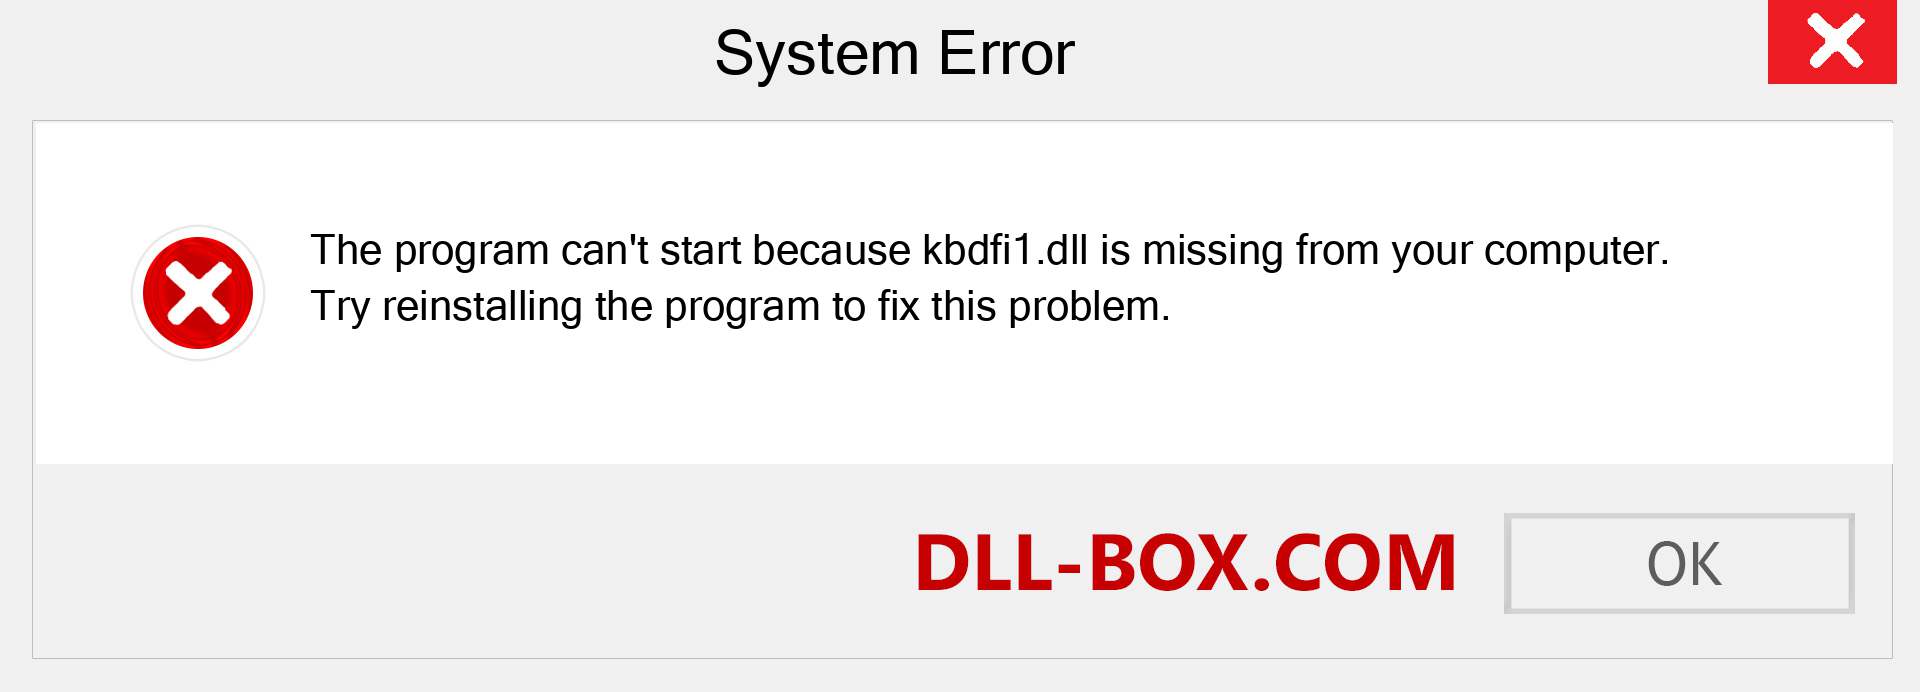  kbdfi1.dll file is missing?. Download for Windows 7, 8, 10 - Fix  kbdfi1 dll Missing Error on Windows, photos, images